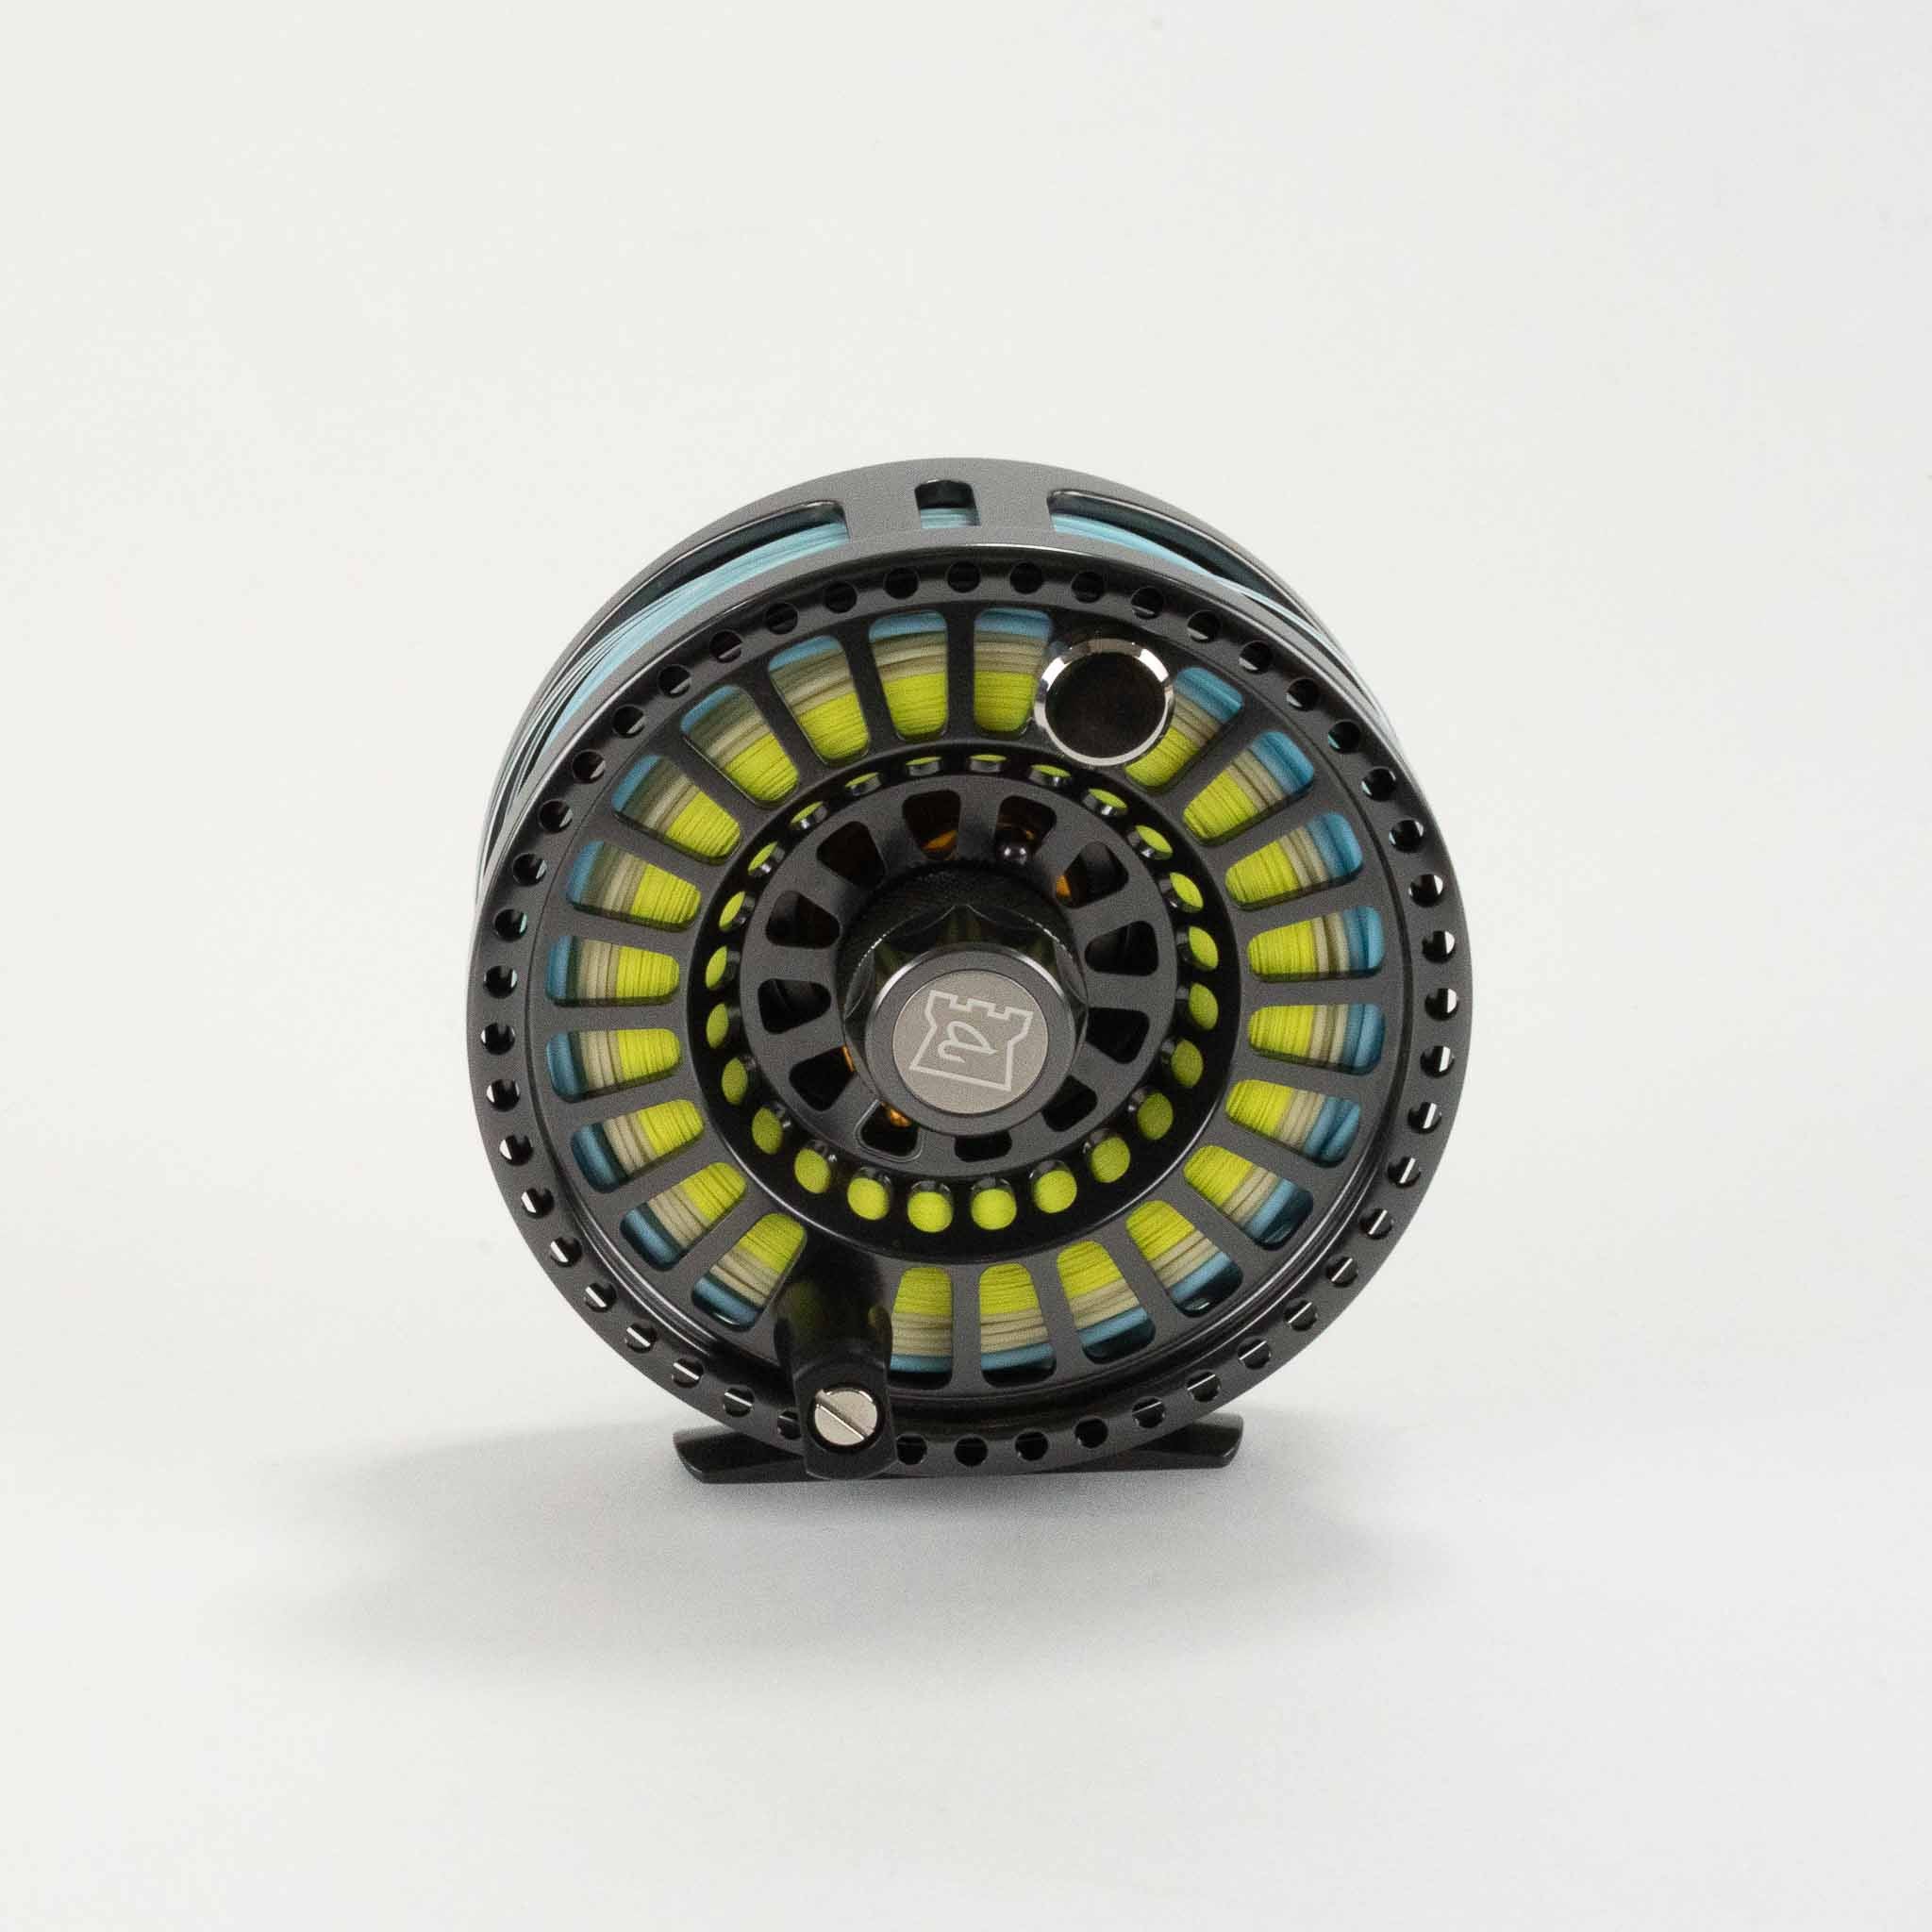 The new Enigma 2.0 and - Taylor Fly Fishing Reels and Rods